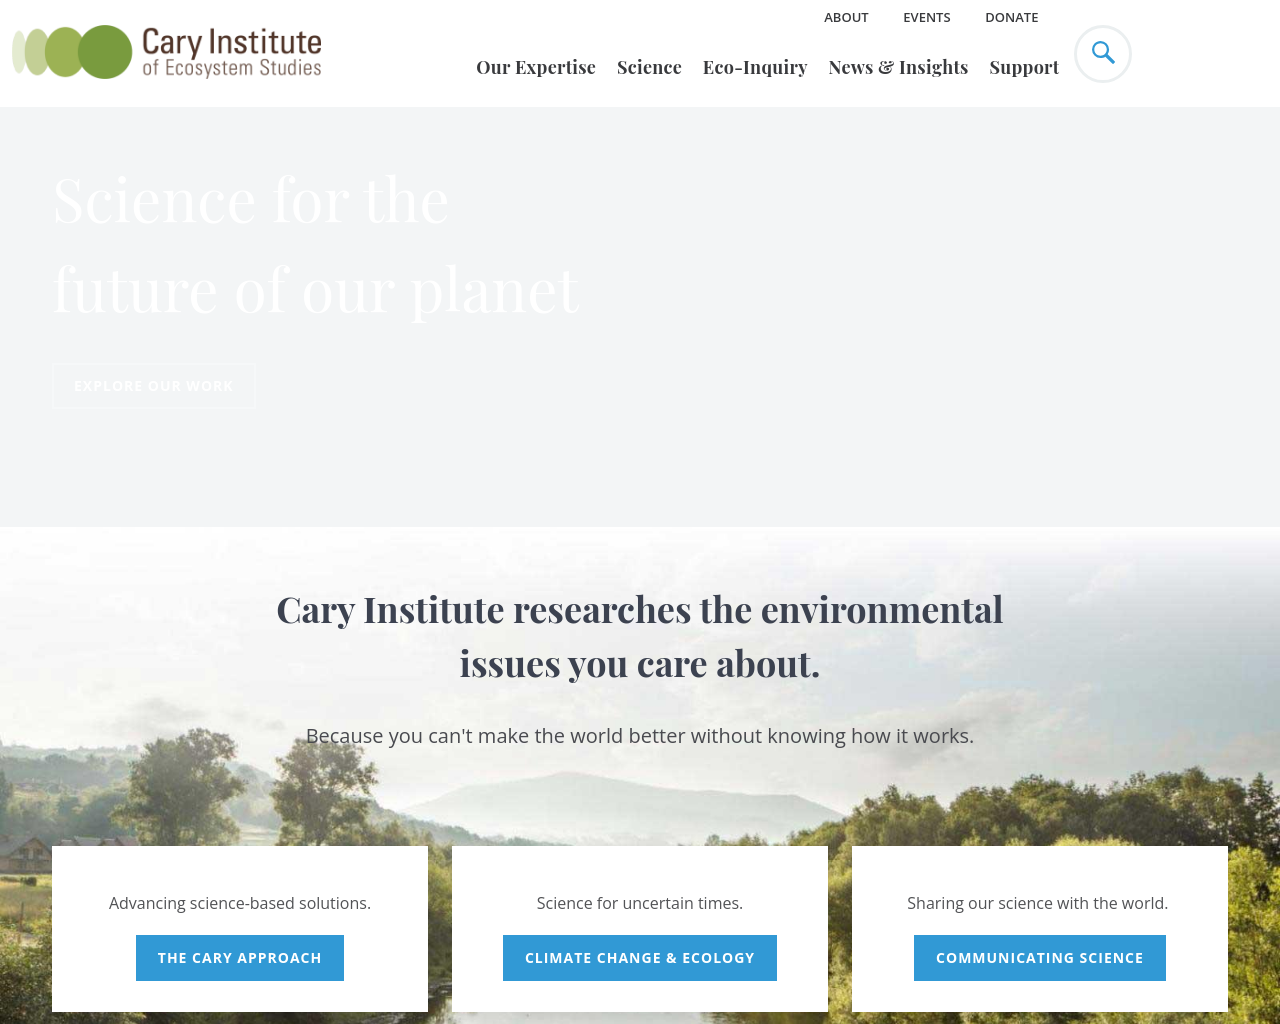 caryinstitute.org